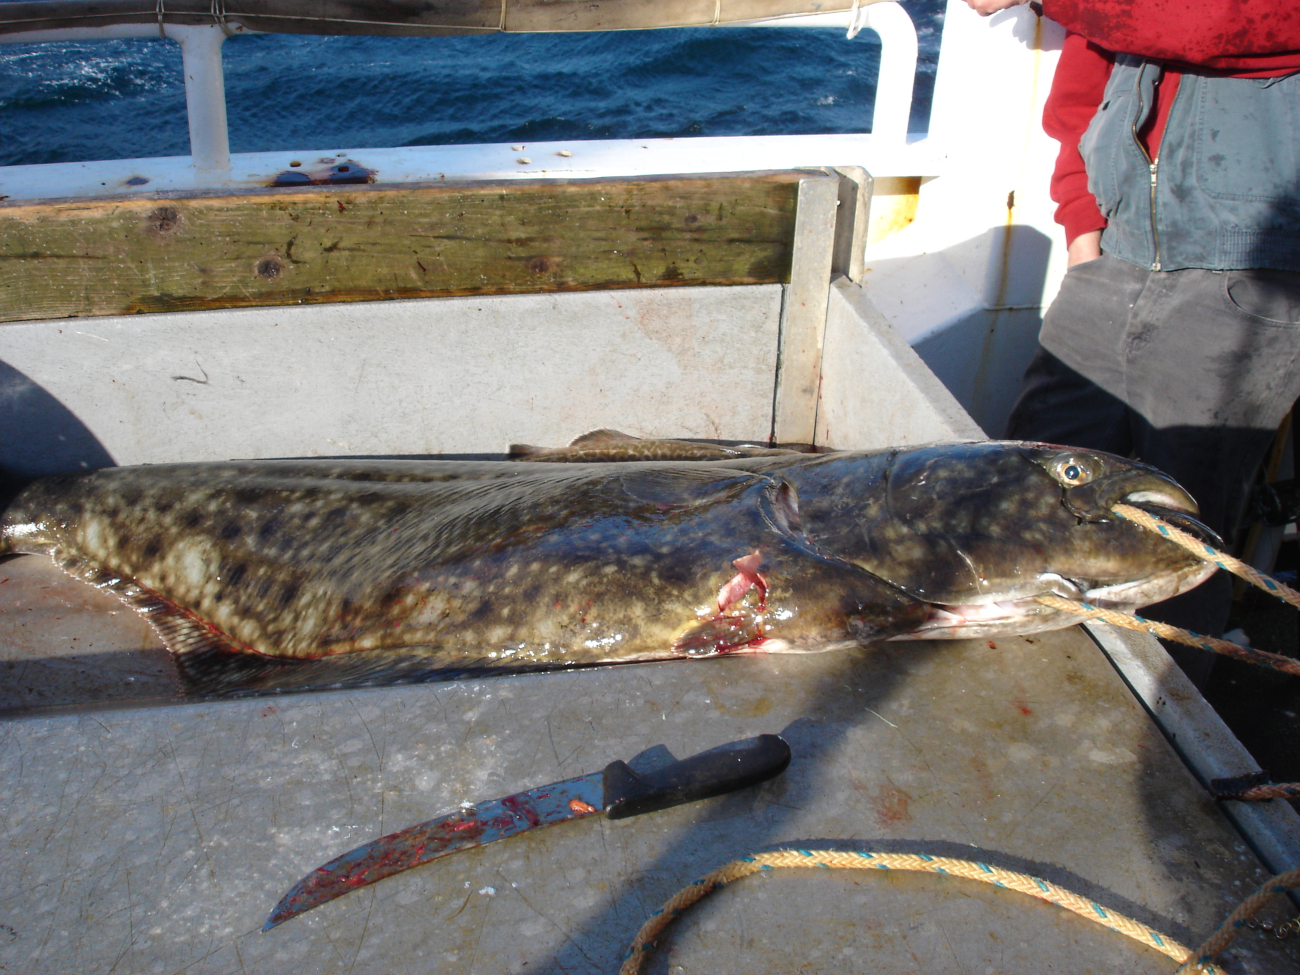 A halibut being sampled